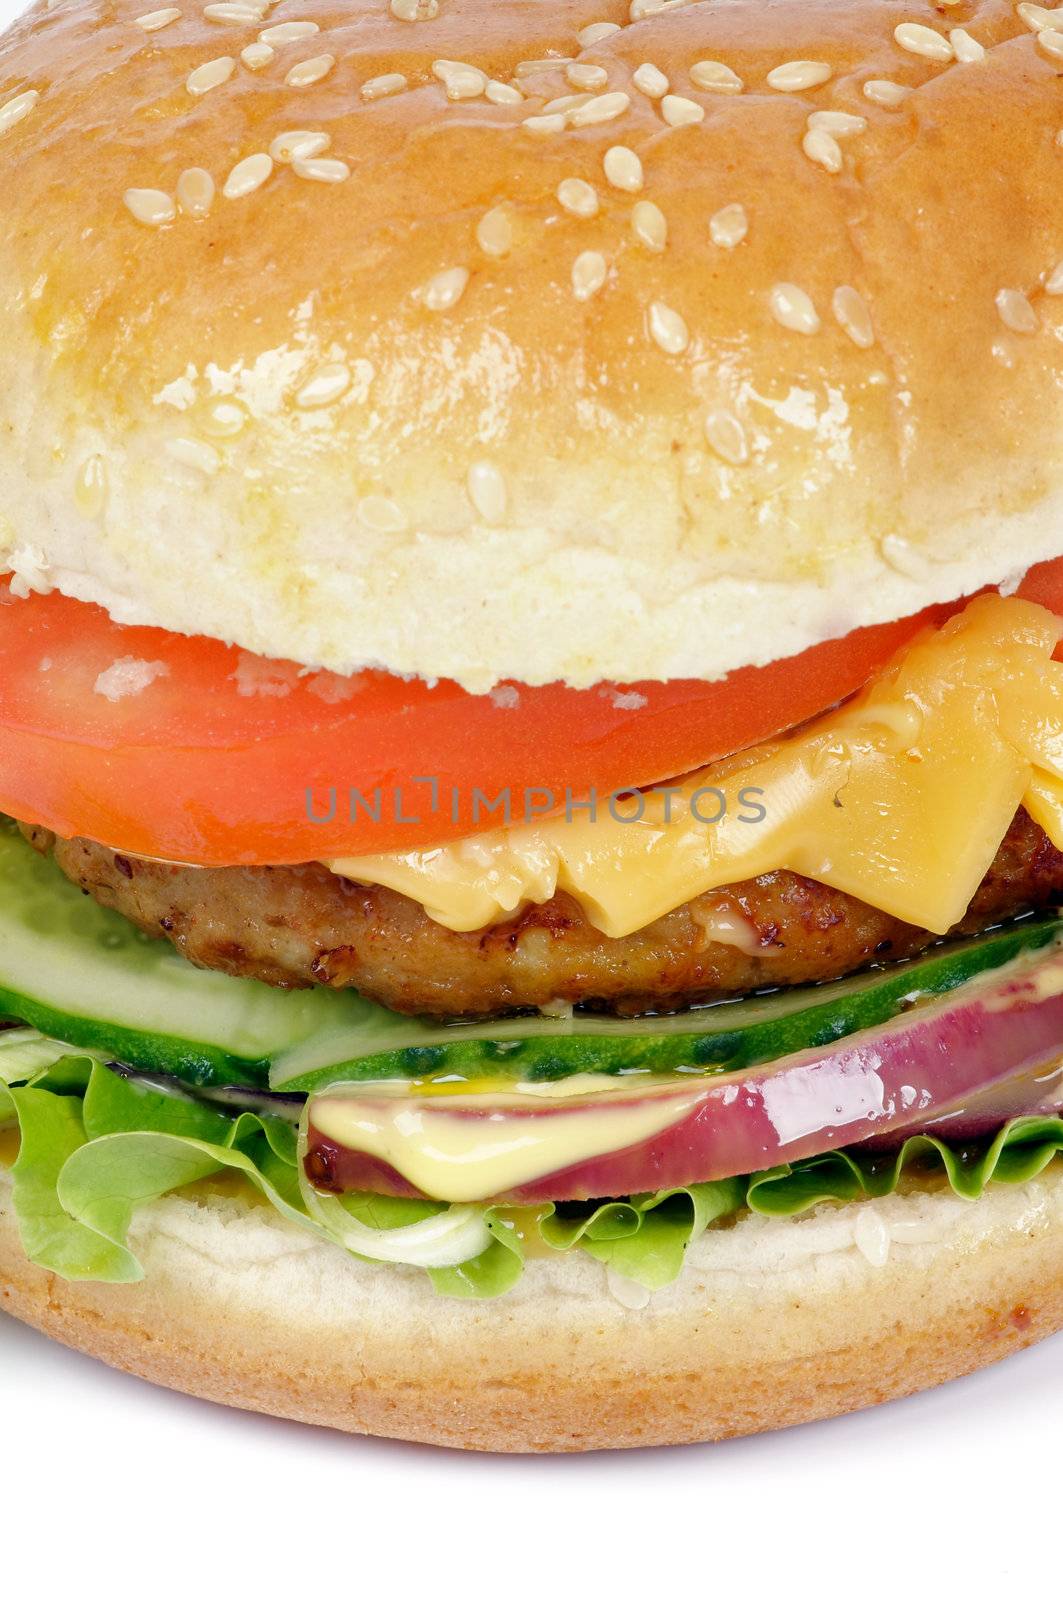 Tasty Hamburger with beef, tomato, letucce and cheese closeup clipping path